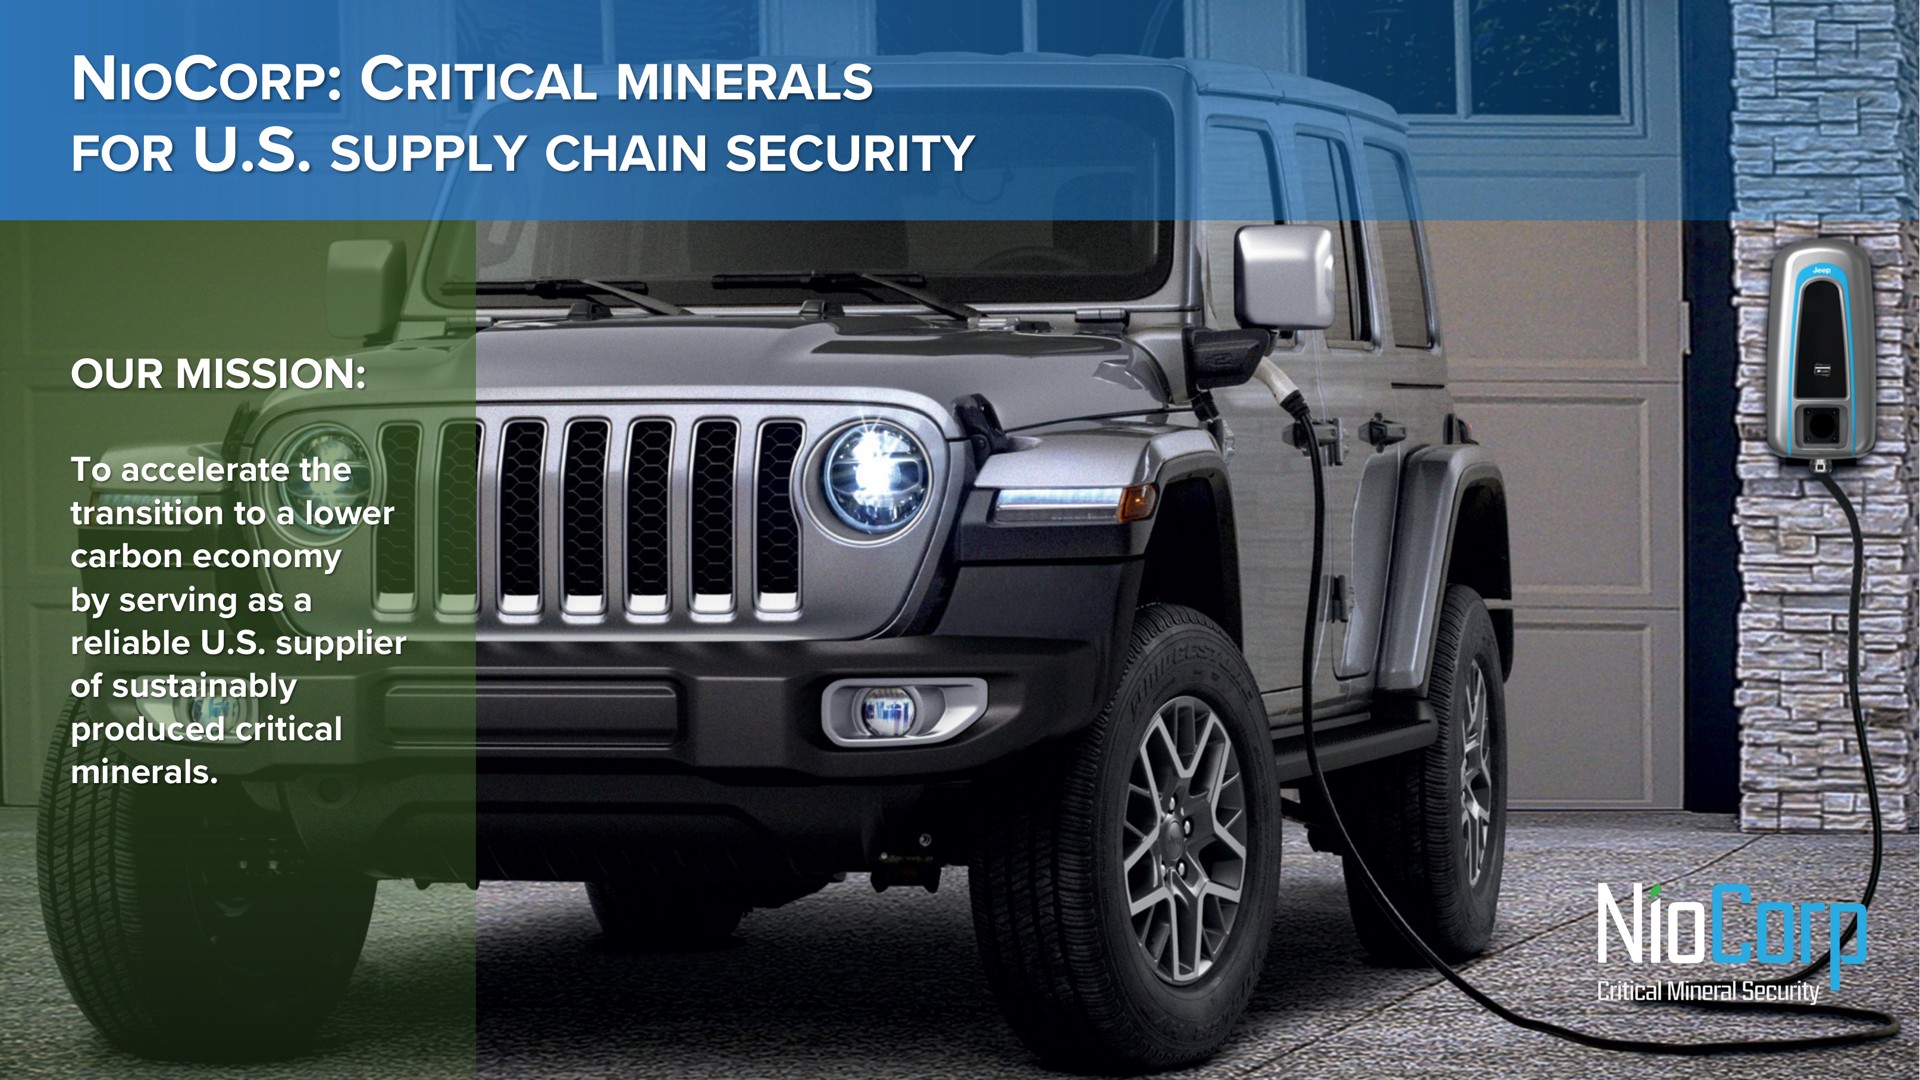 critical minerals for supply chain security our mission to accelerate the transition to a lower carbon economy by serving as a reliable supplier of produced critical minerals at be afore | NioCorp